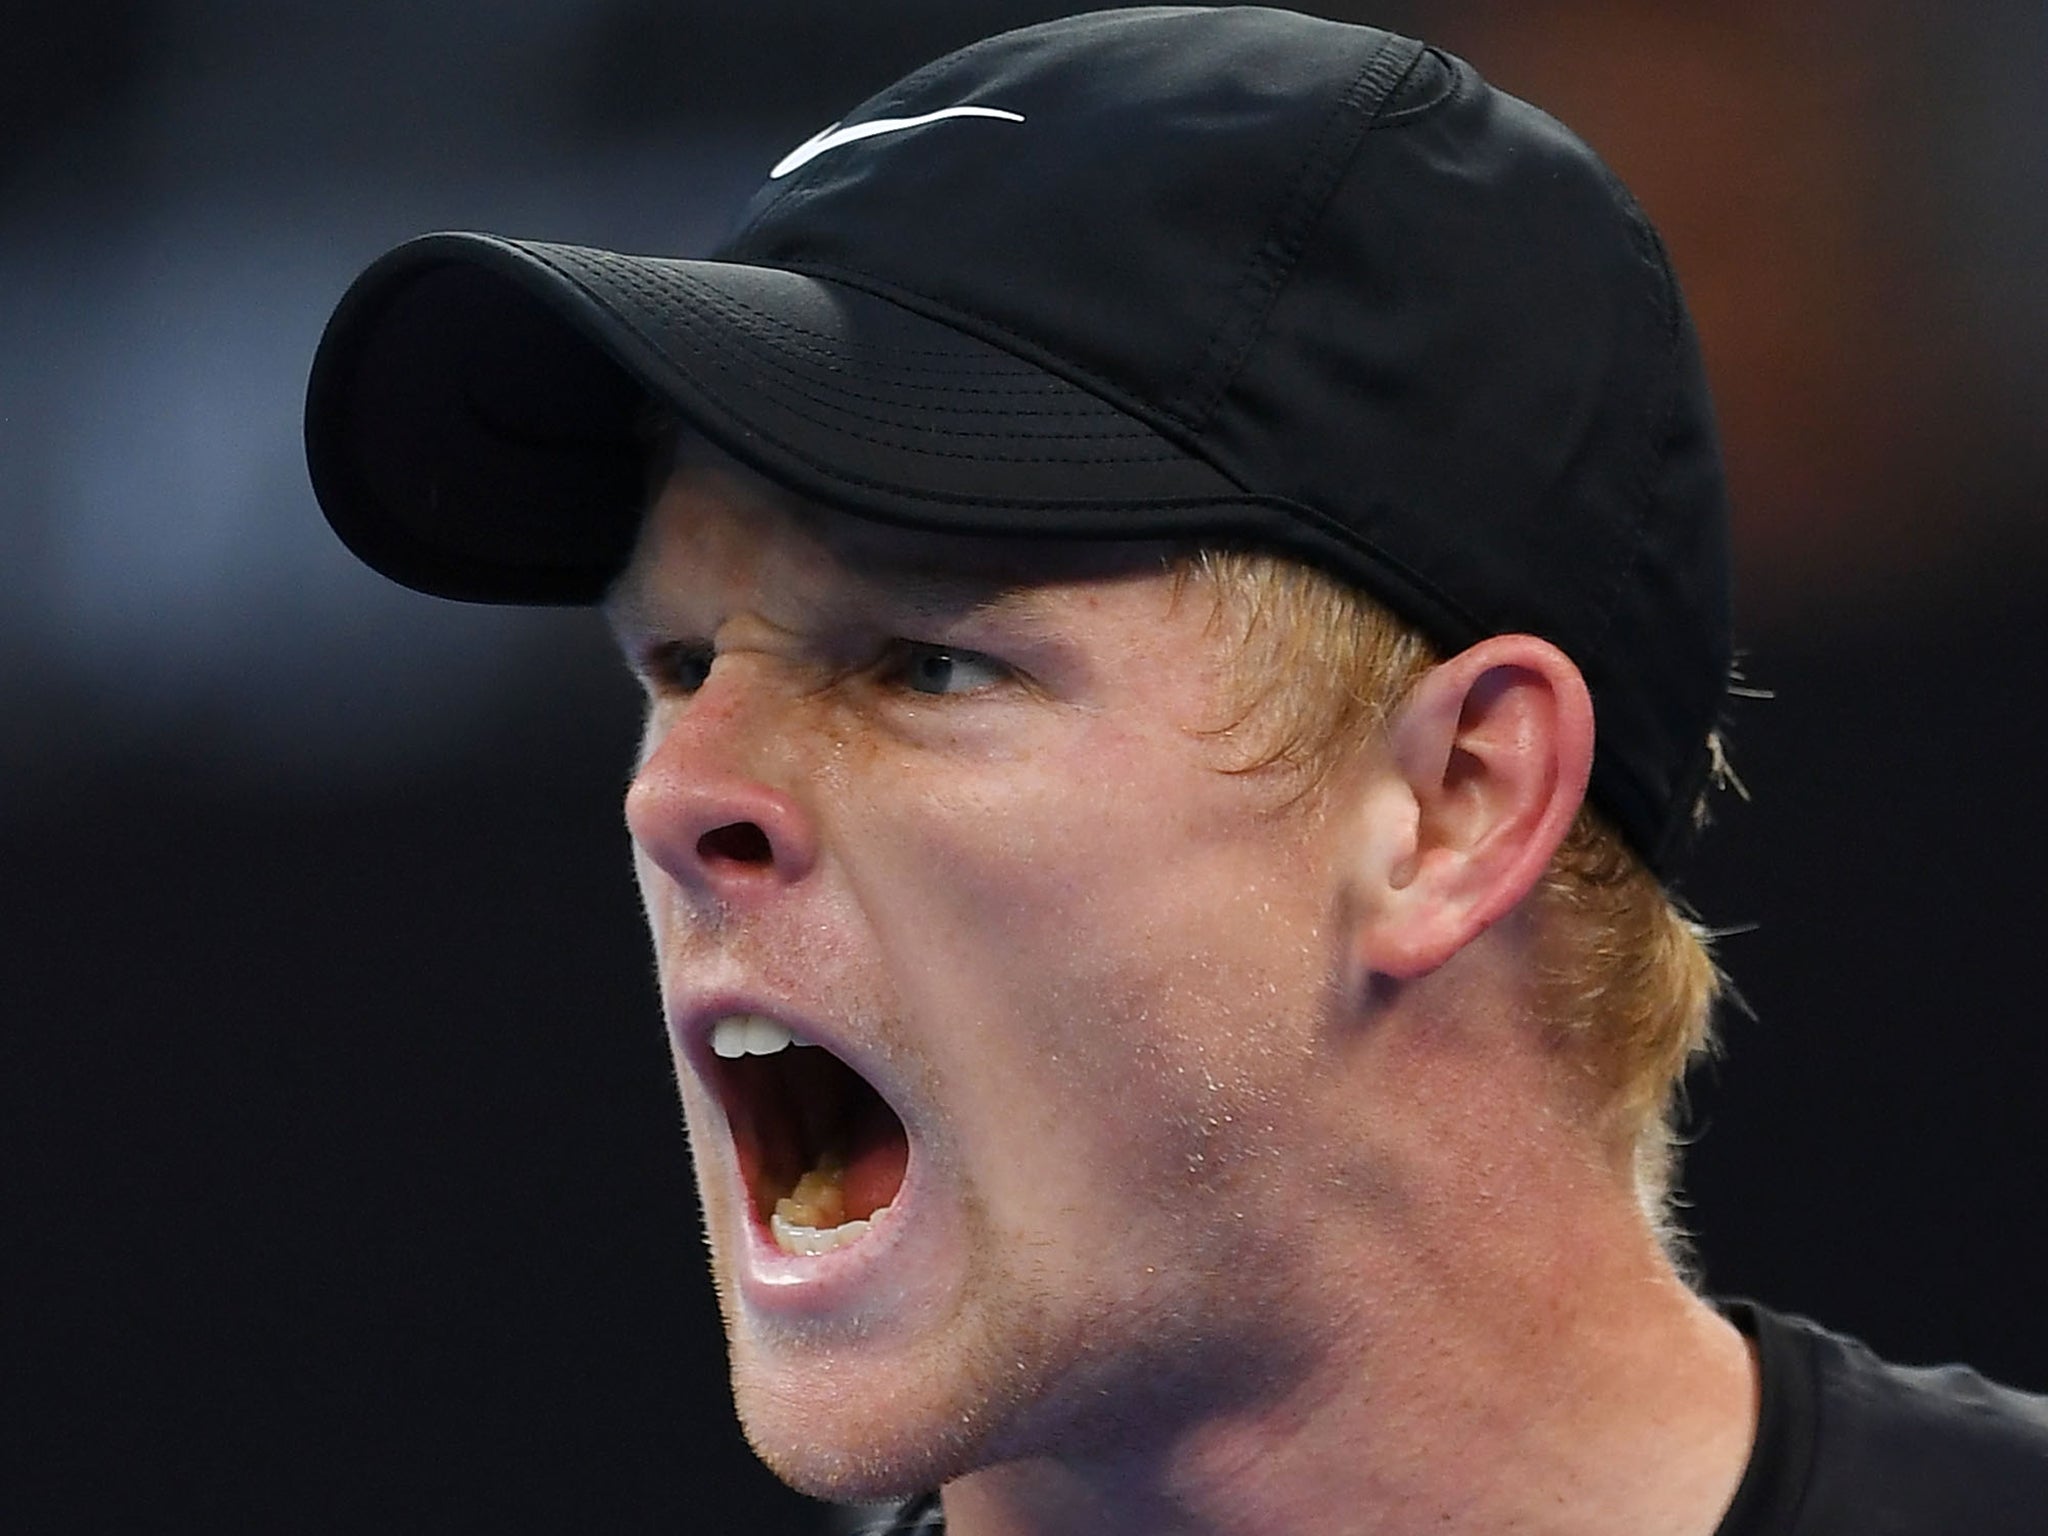 Edmund showed his emotion with the victory